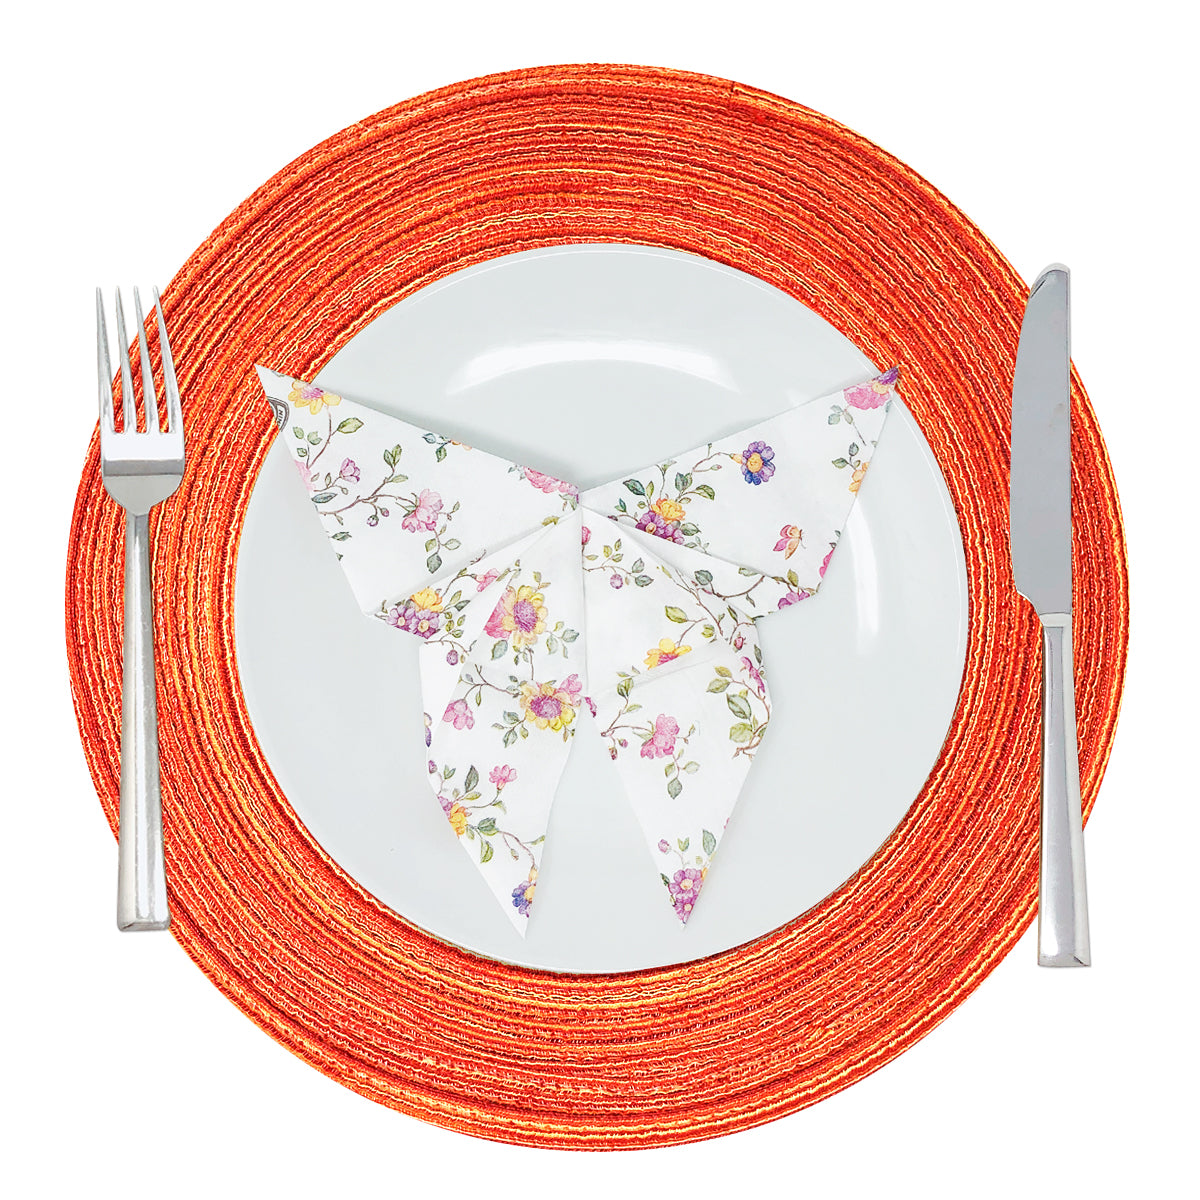 Wrapables 15" Woven Round Placemats (Set of 6)